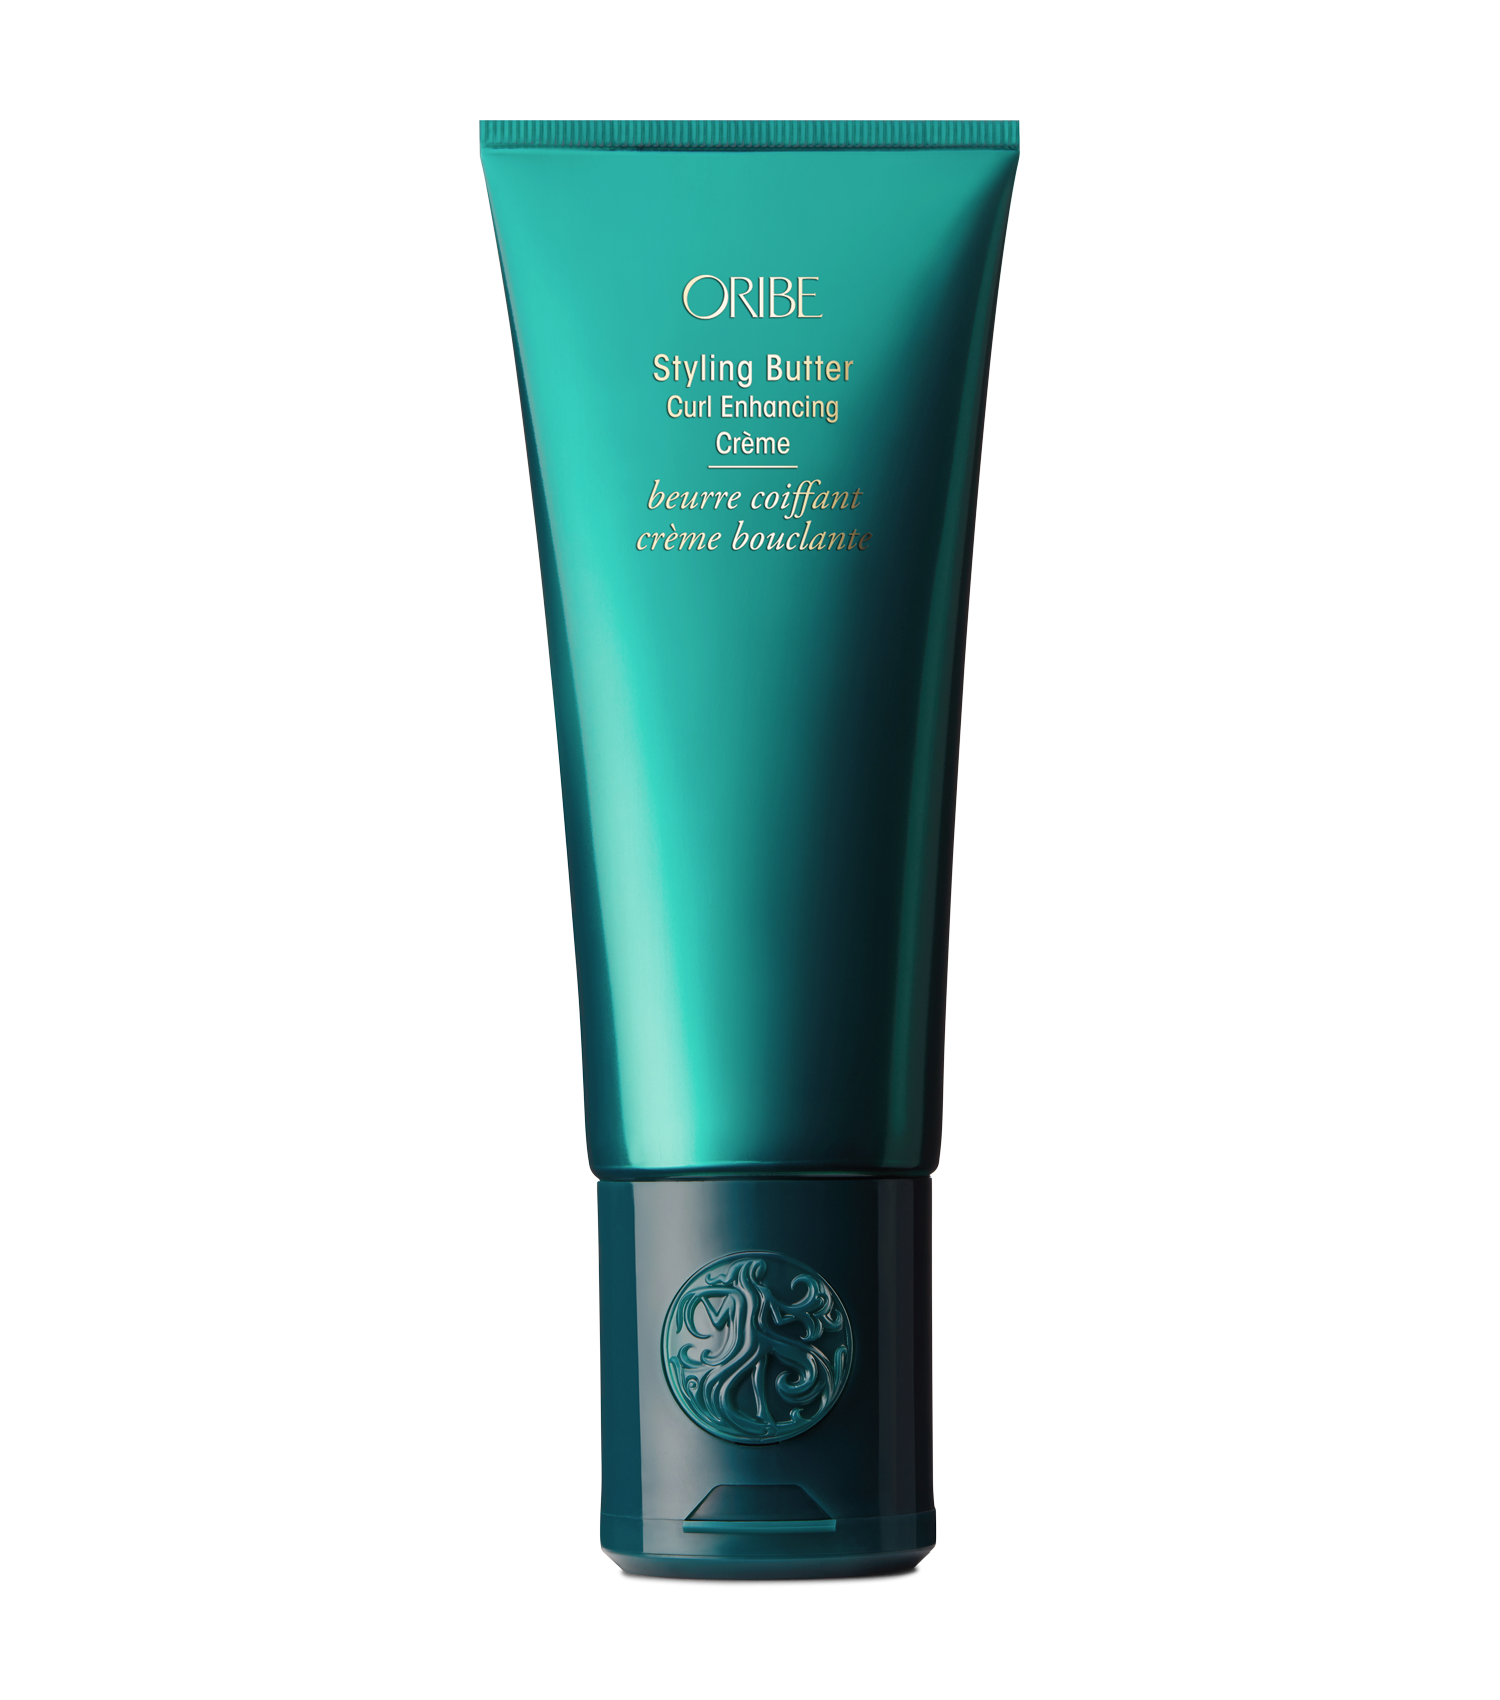 Oribe Styling Butter Curl Enhancing Creme Oribe Styling Butter Curl Enhancing Creme 1